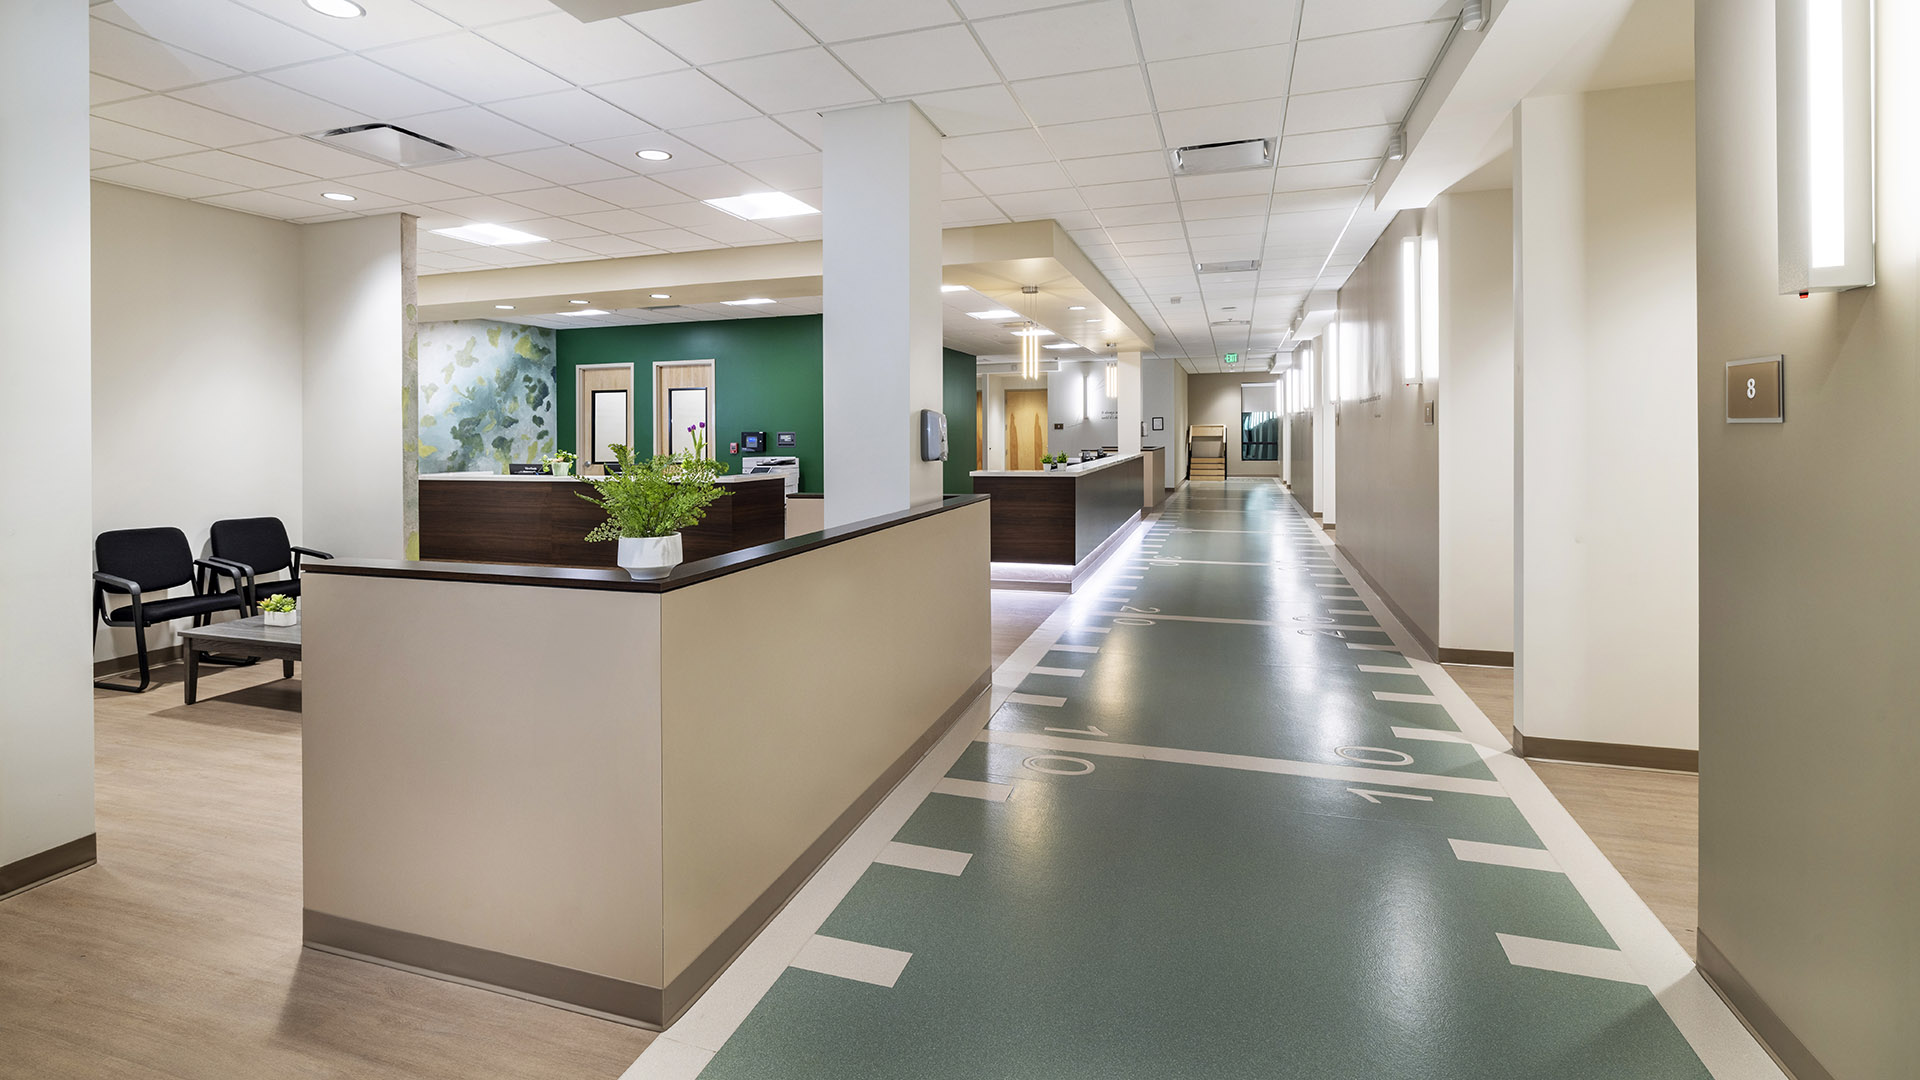 Alternate view of football field-decorated reception area at Crovetti Orthopaedics